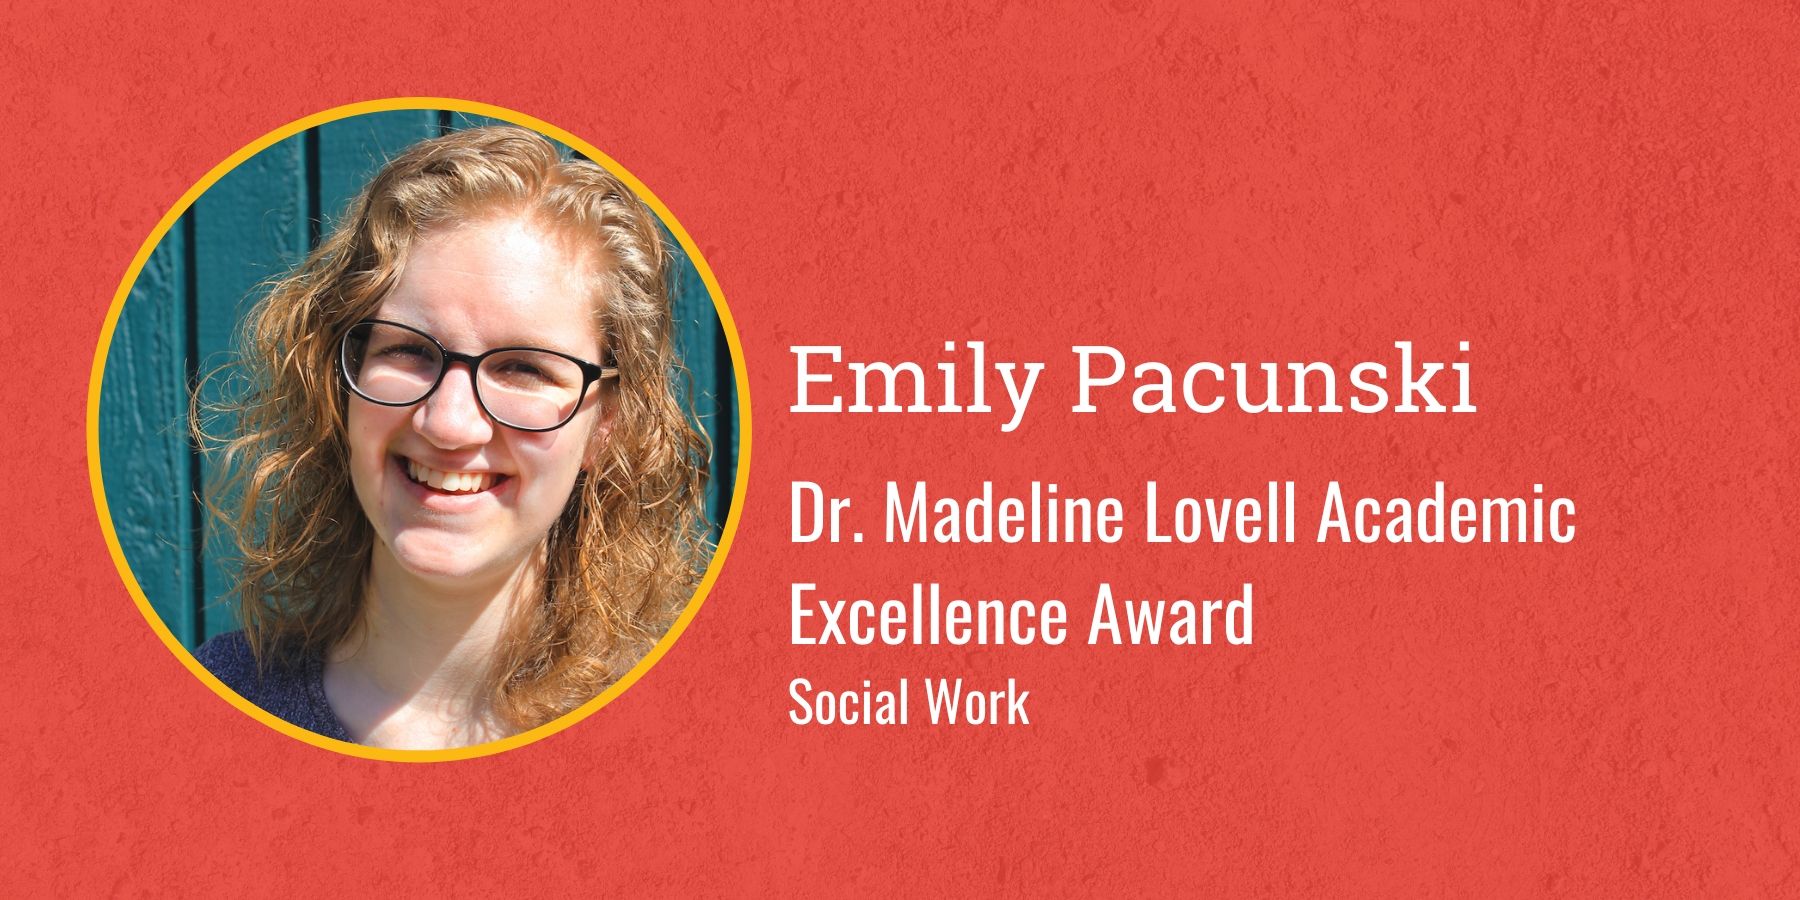 Photo of Emily Pacunksi and text Dr. Madeline Lovell Academic Excellence Award, Social Work